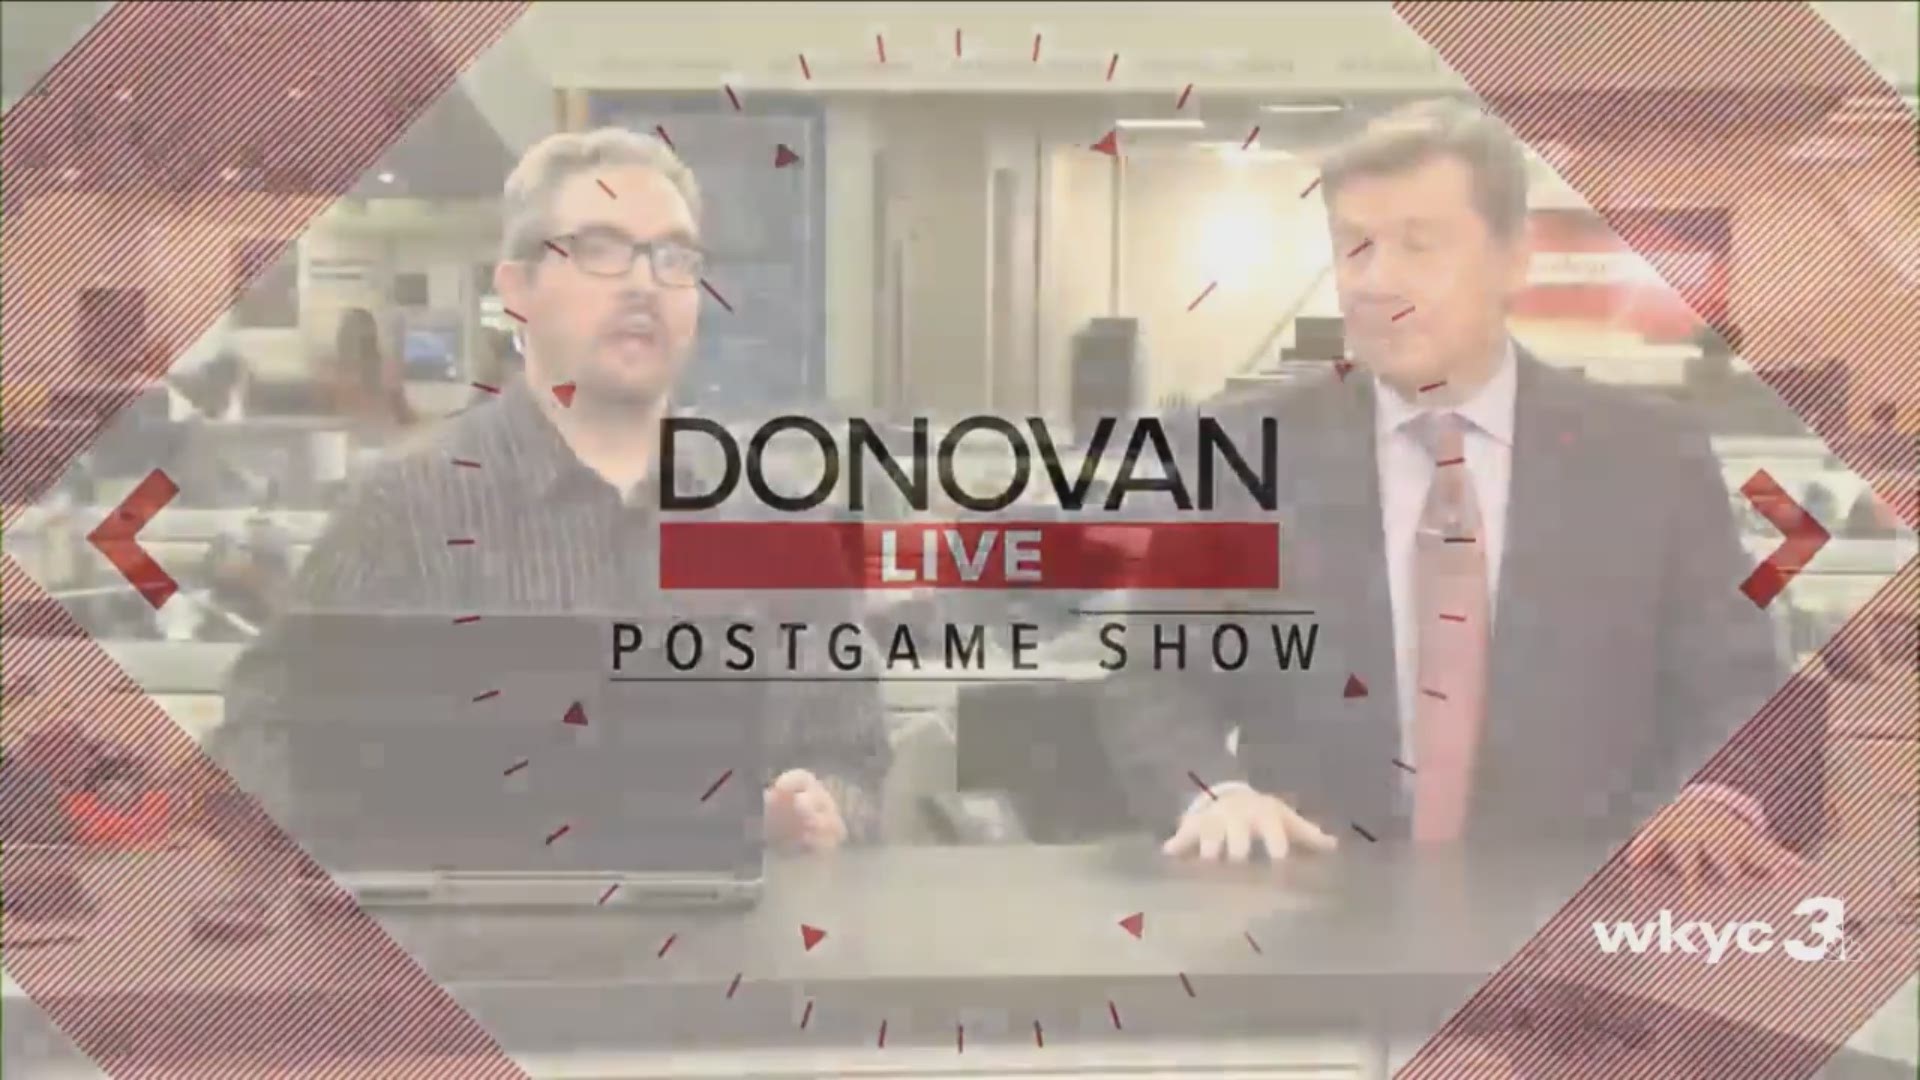 Takeaways from Jimmy's interview with Mayor Frank Jackson and Cleveland Browns loss to Chargers: Donovan Live Postgame Show